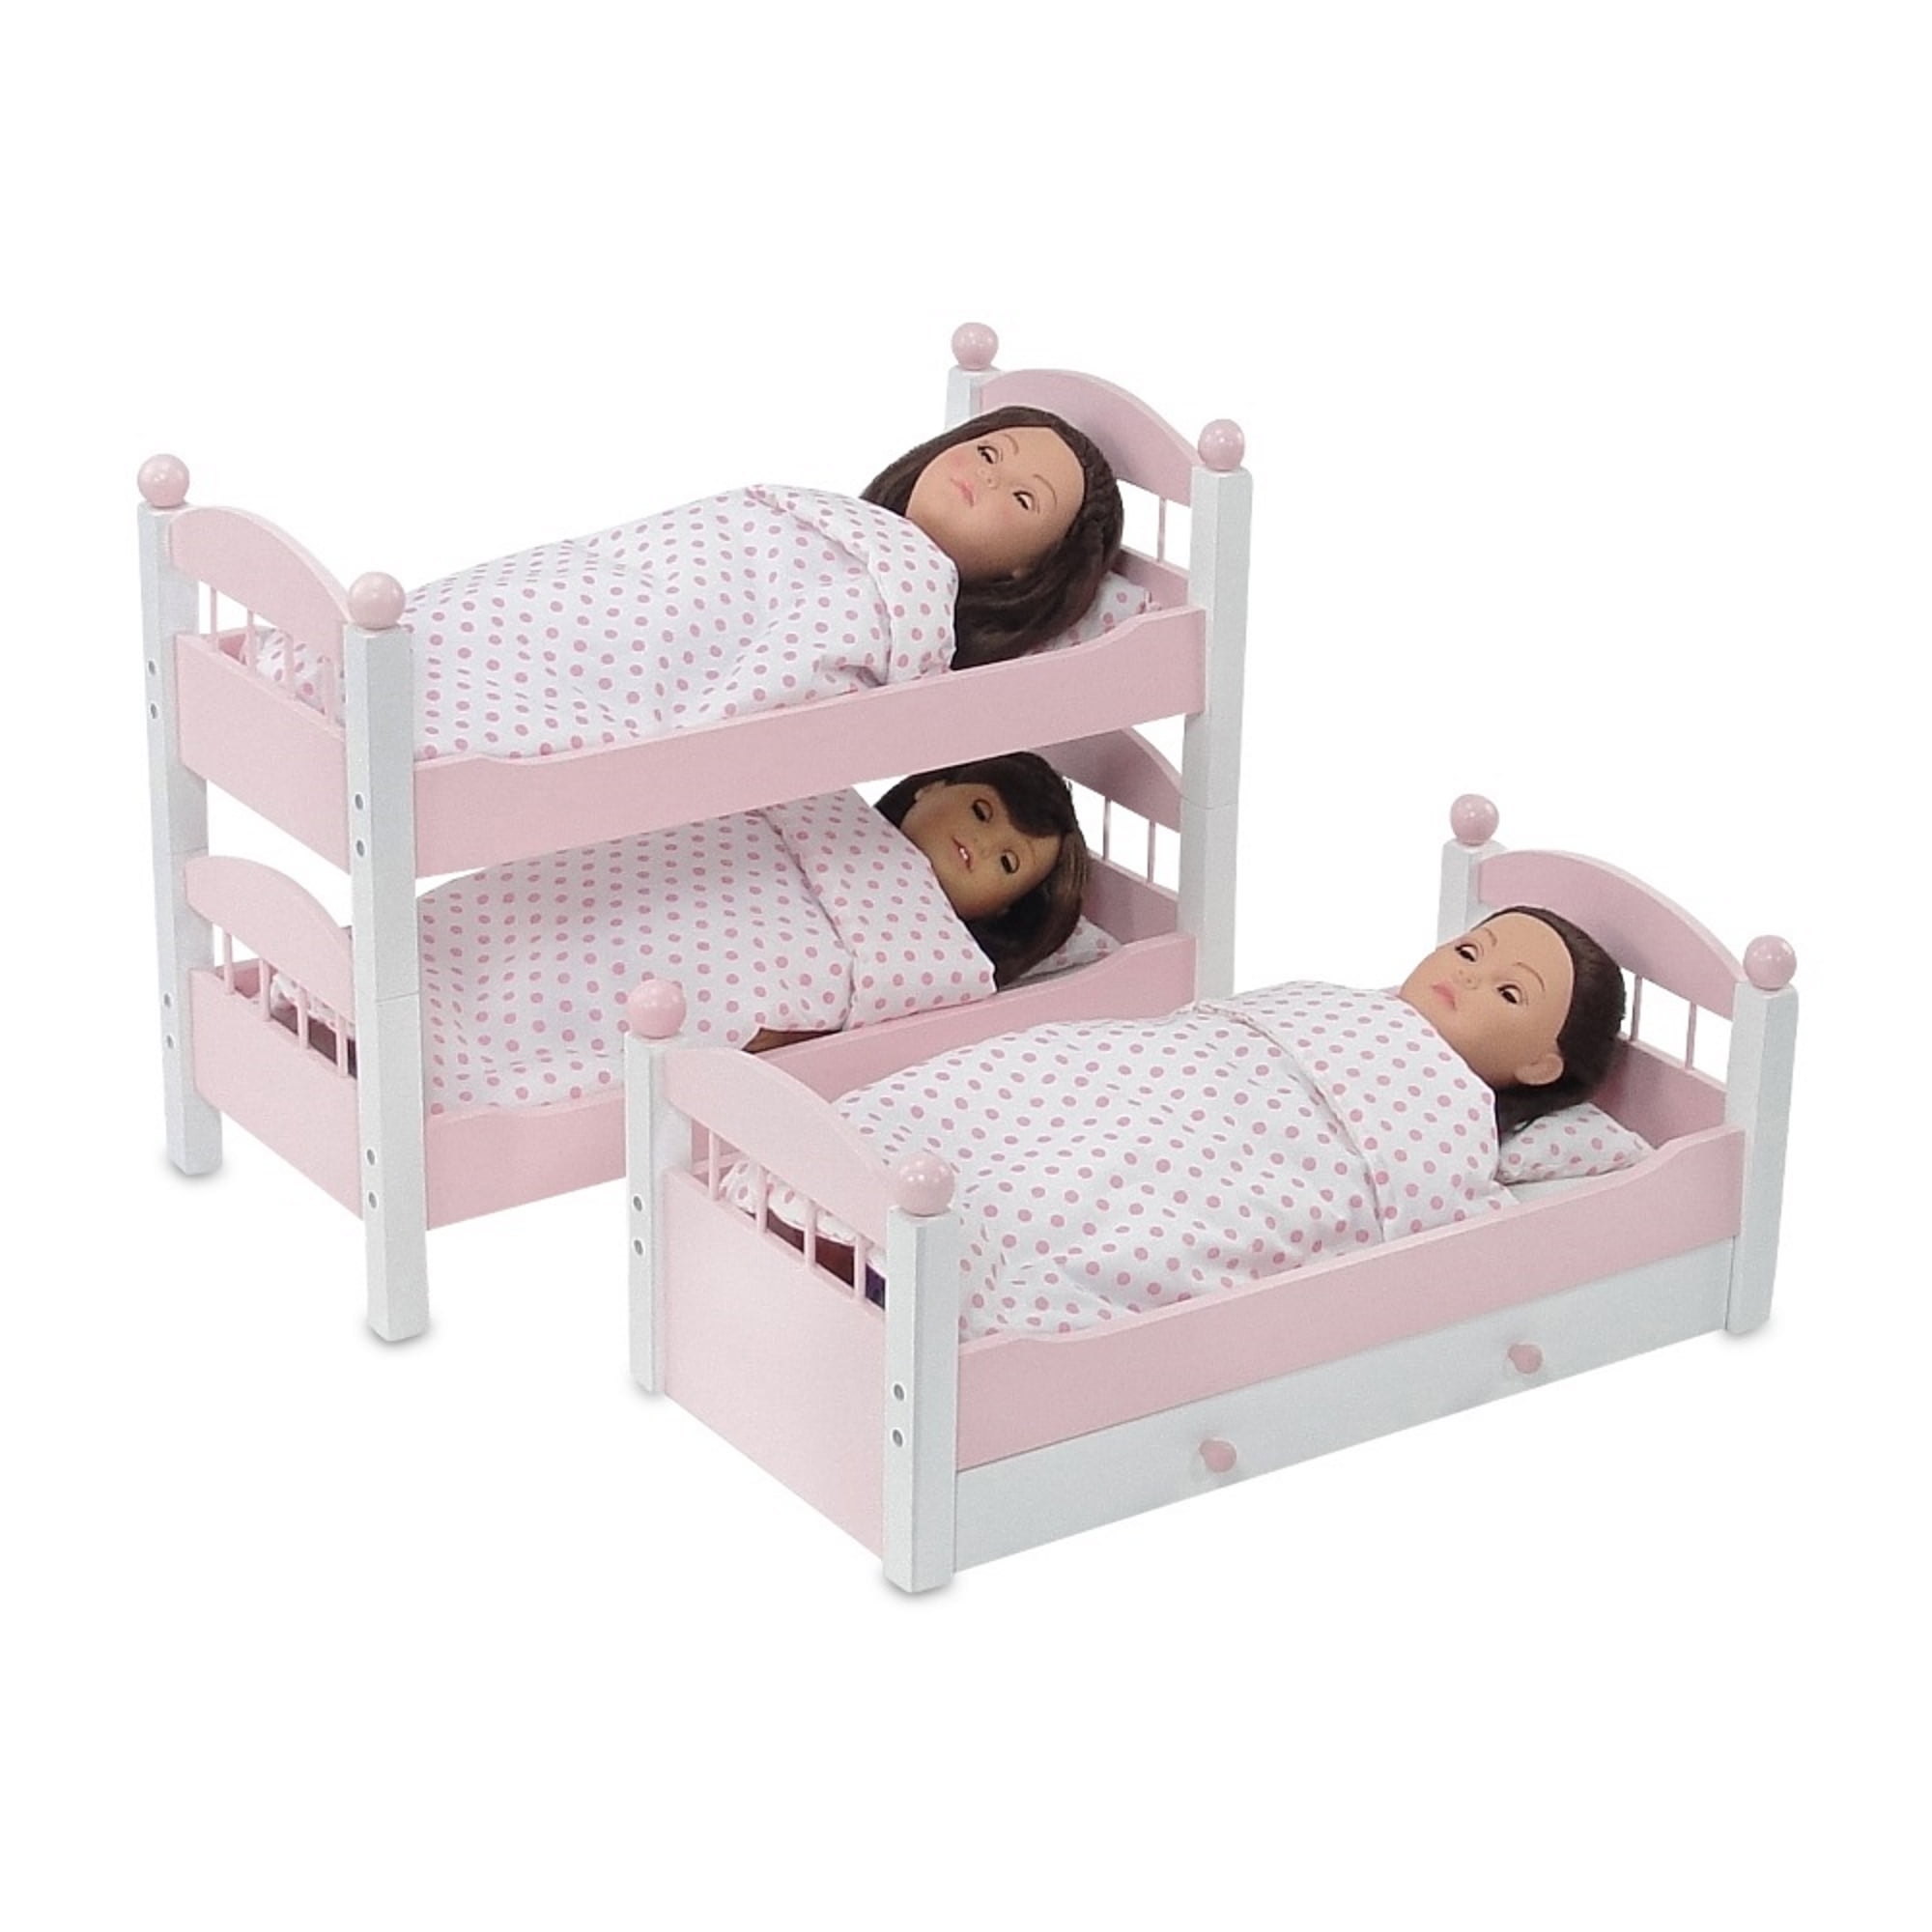 18 Inch Doll Bunk Bed With Trundle 2022 Bunk Beds Design